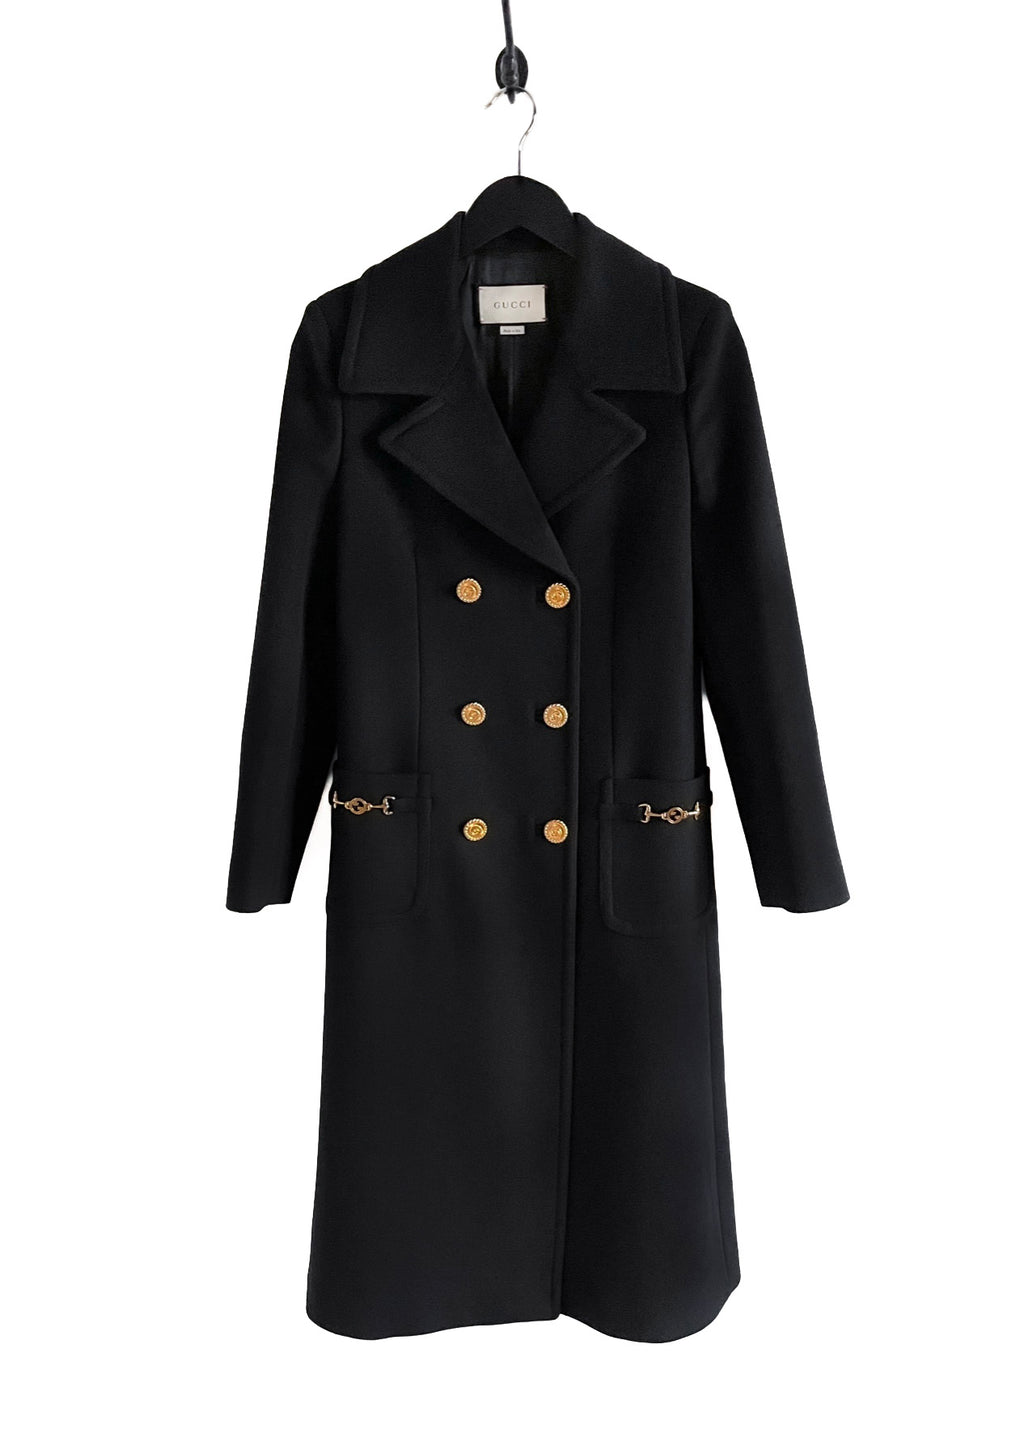 Gucci 2019 Black Double Breasted Wool Coat